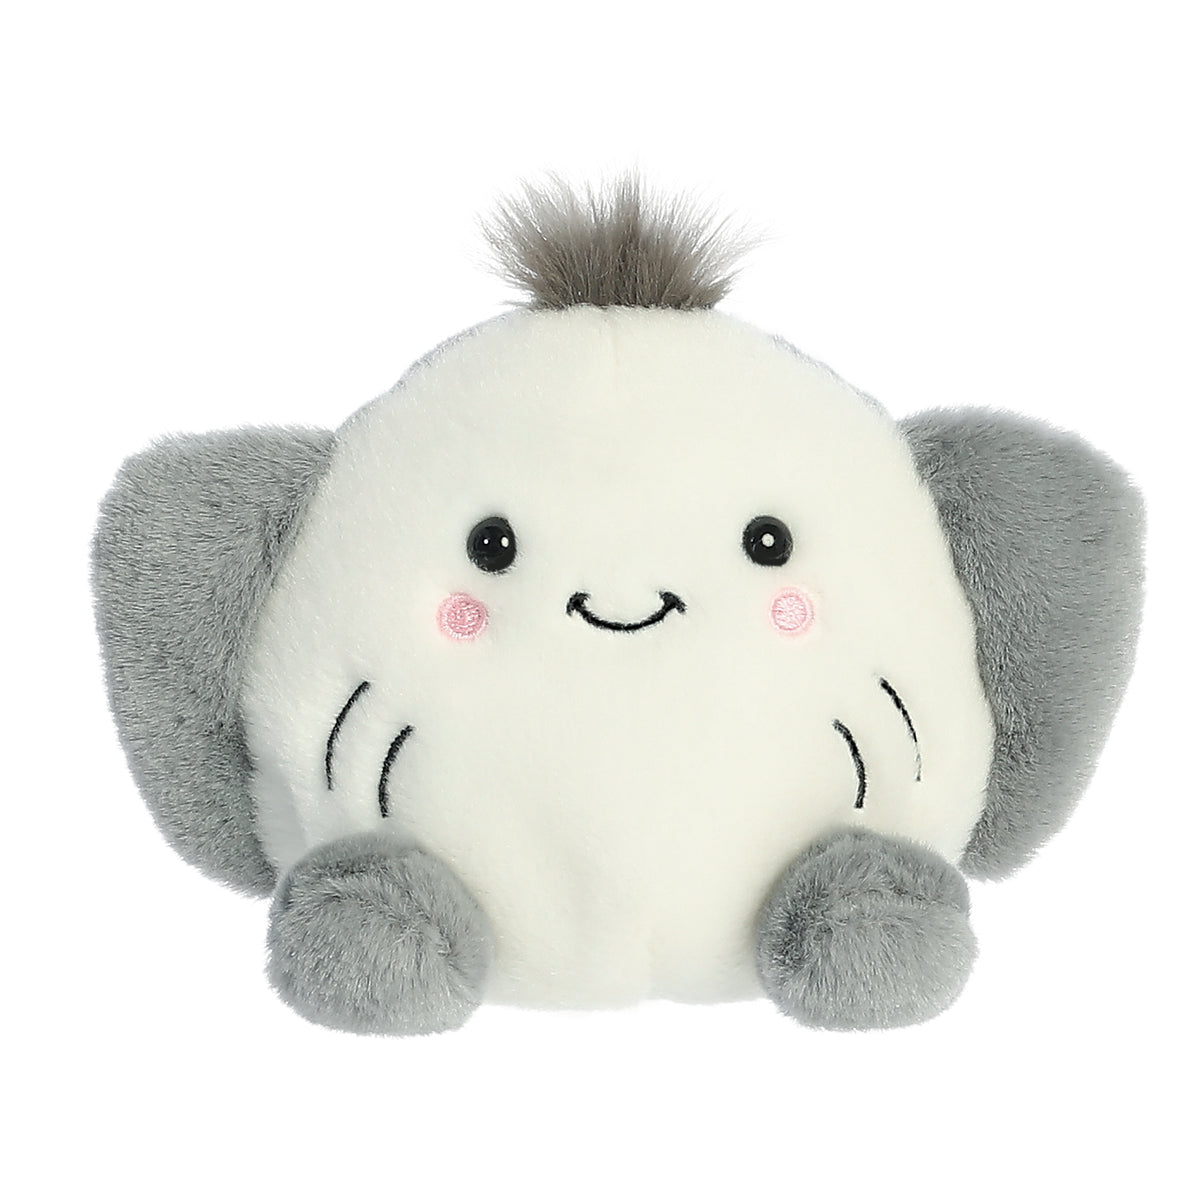 Stingray plush from Palm Pals, featuring a unique black patch of hair and soft gray hues, ready for heartwarming snuggles.